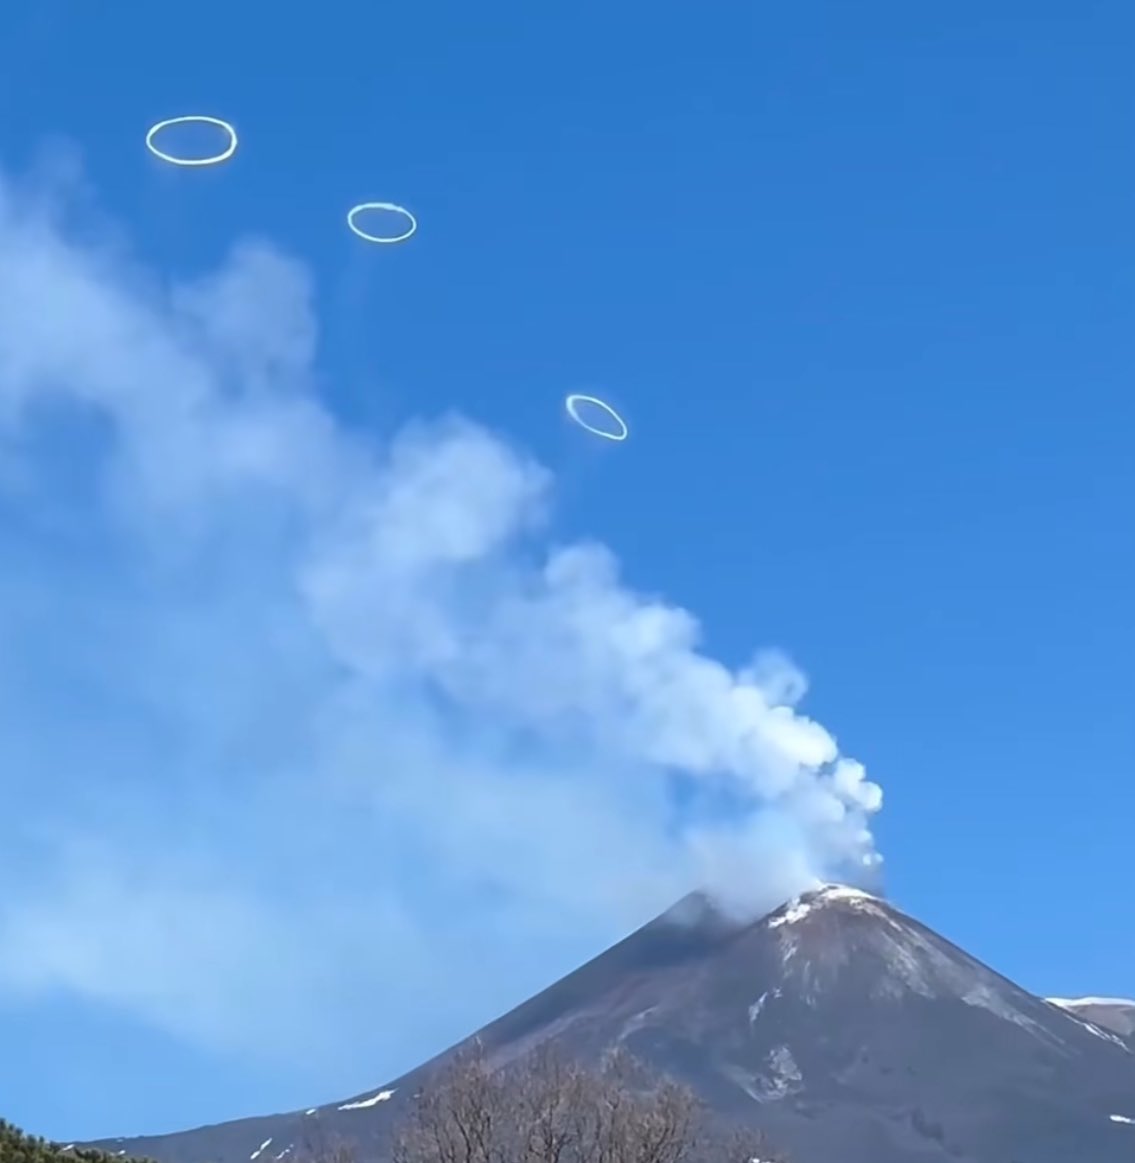 didn’t realize europe’s most active volcano was chill like that